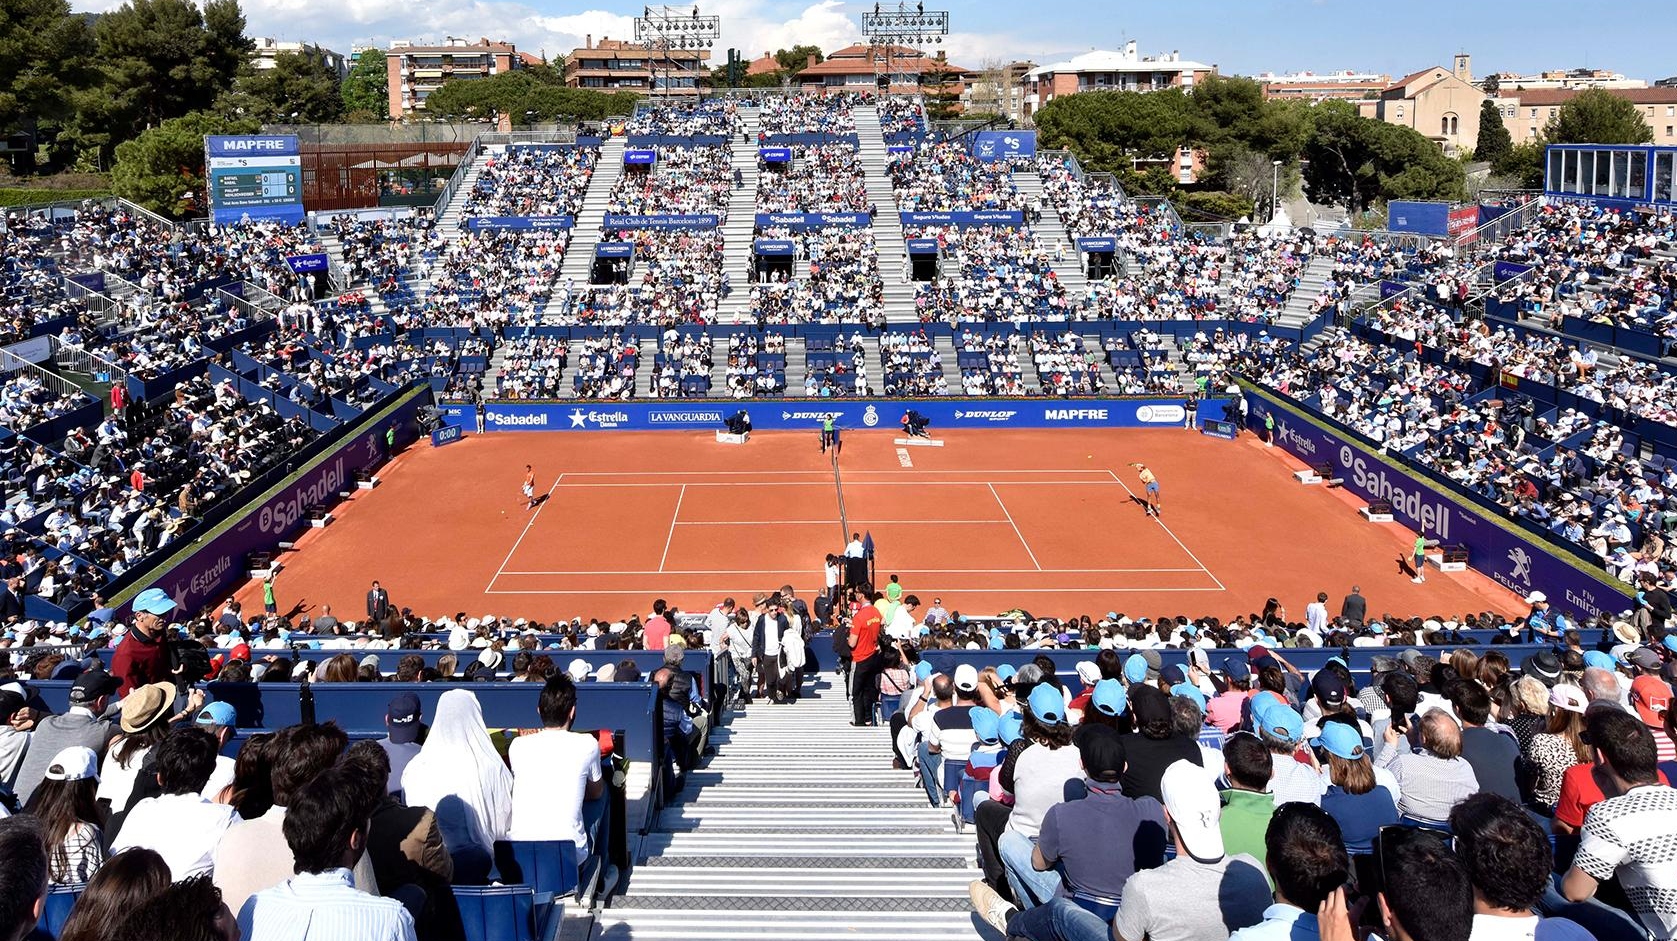 Tennis Arena - Apps on Google Play